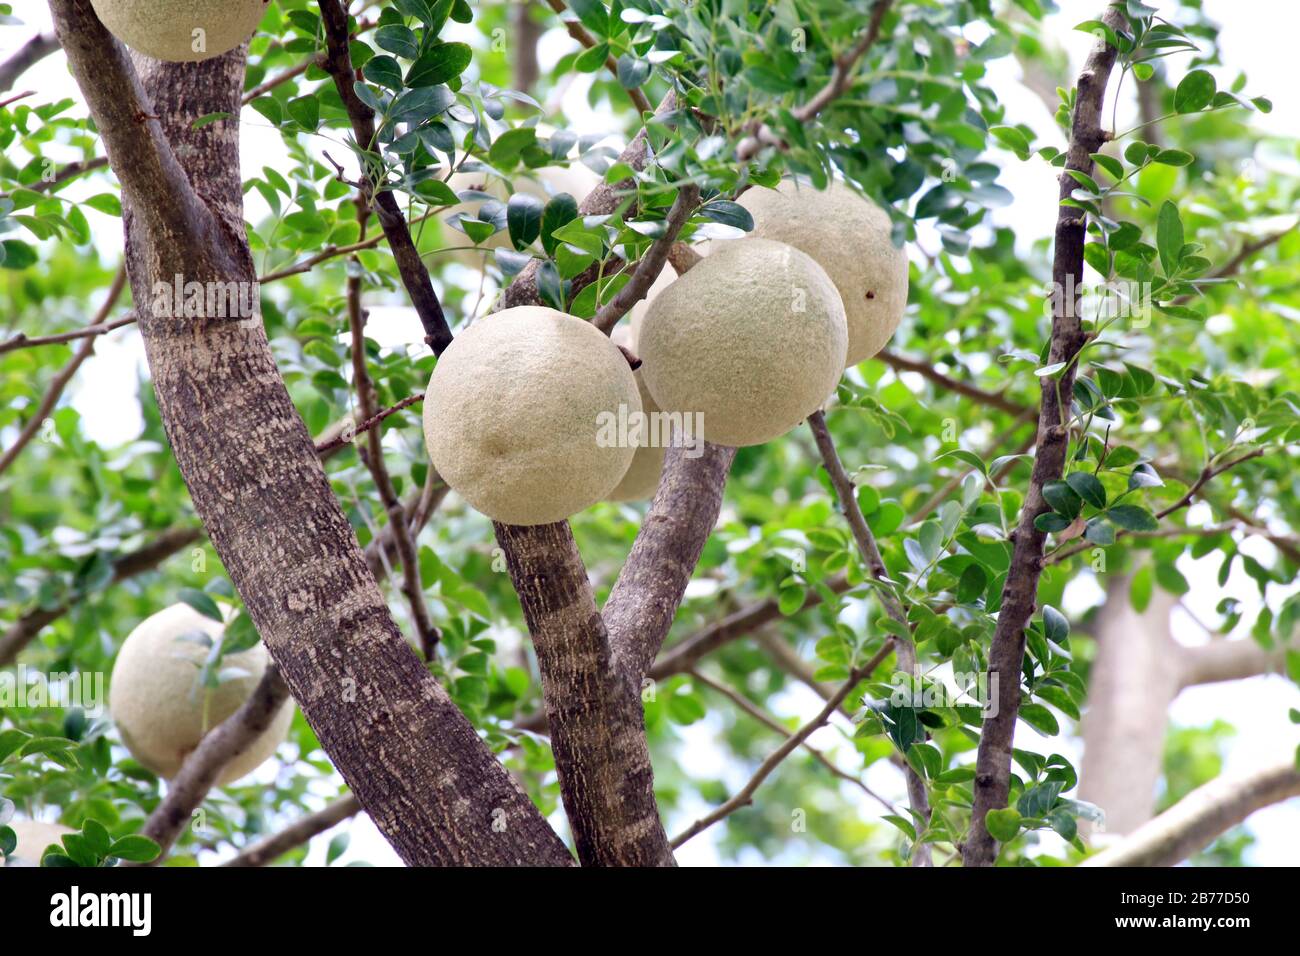 Herb Makwid, wood-apple on tree of Edible Thai fruit of subcontinent asia Stock Photo